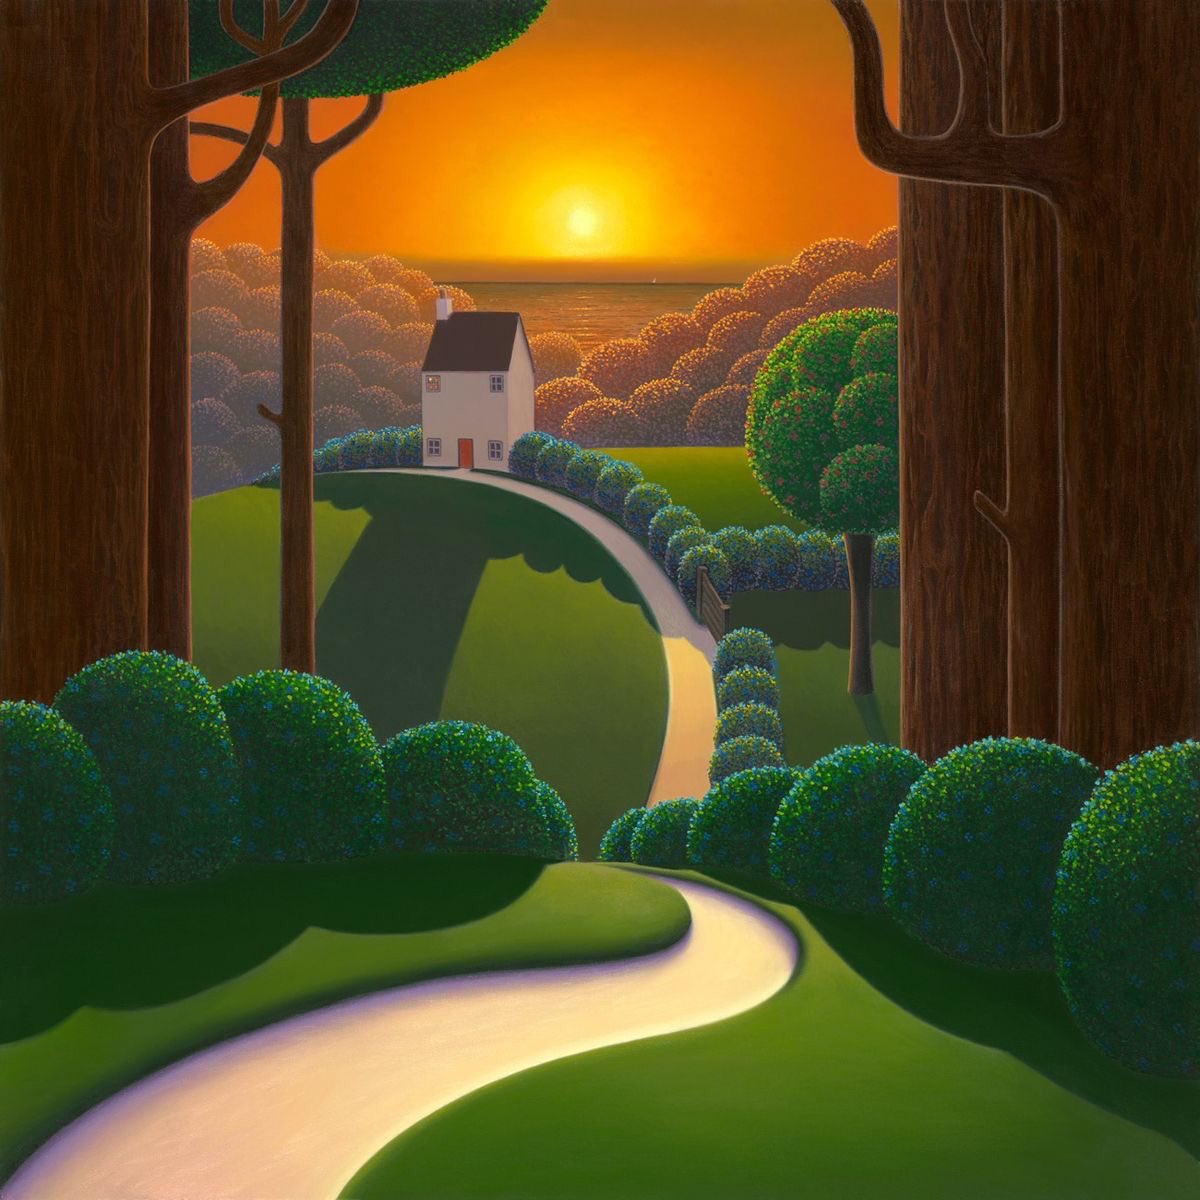 Paul Corfield ‘Amber Sky ‘ Feel good paintings comforting and homely. Back to the house with the red door. Thanks my X Twitterarty. Back tomorrow. ( after housework) Helen 🤯🌻🌷🐝DrS 👨‍🍳⛵️📚😤 Max ♥️🐶🙄